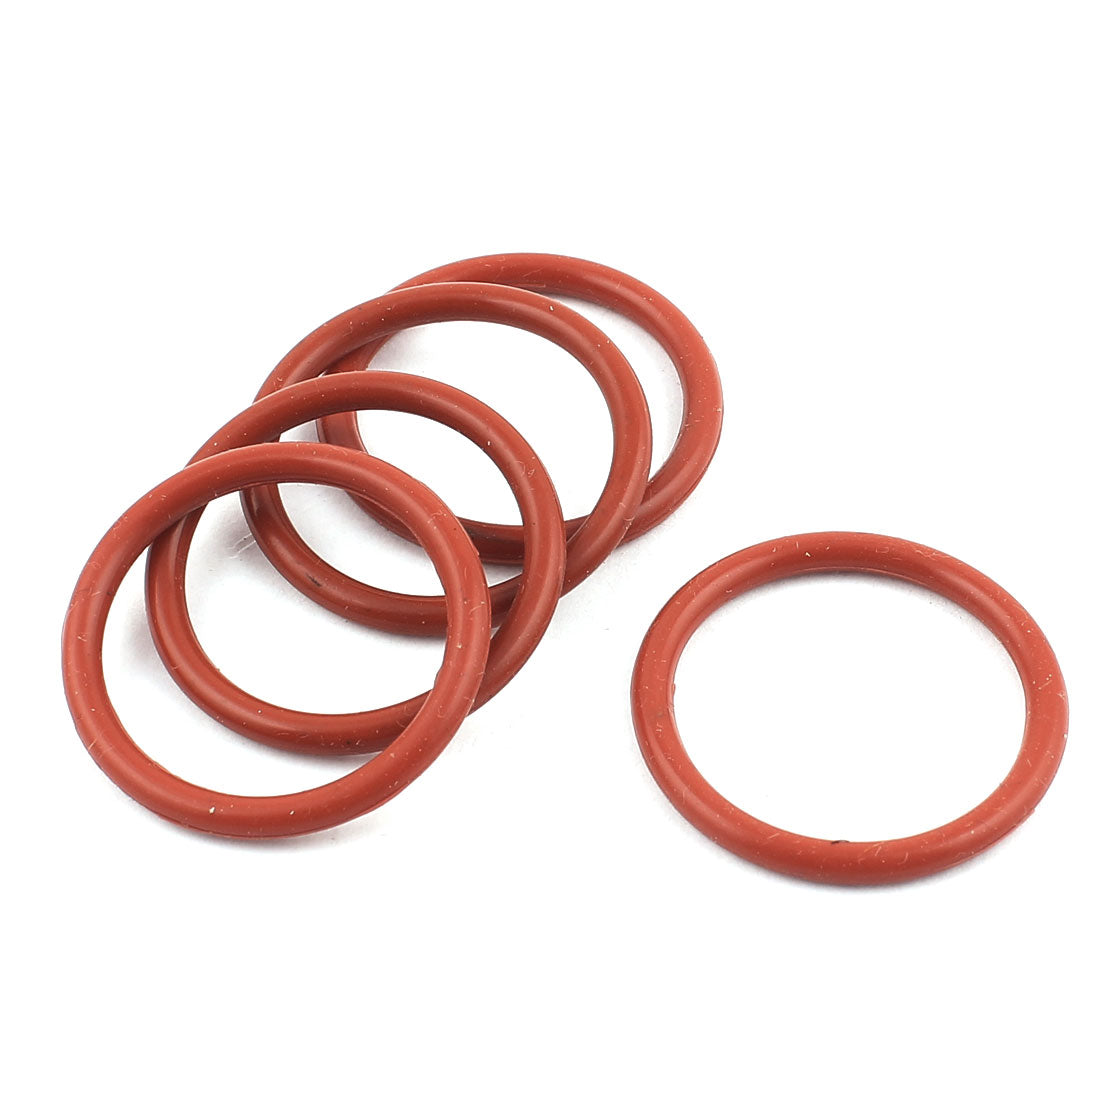 uxcell Uxcell Rubber 33mm x 27mm x 3mm Oil Seal O Rings Gaskets Washers Brick Red 5 Pcs